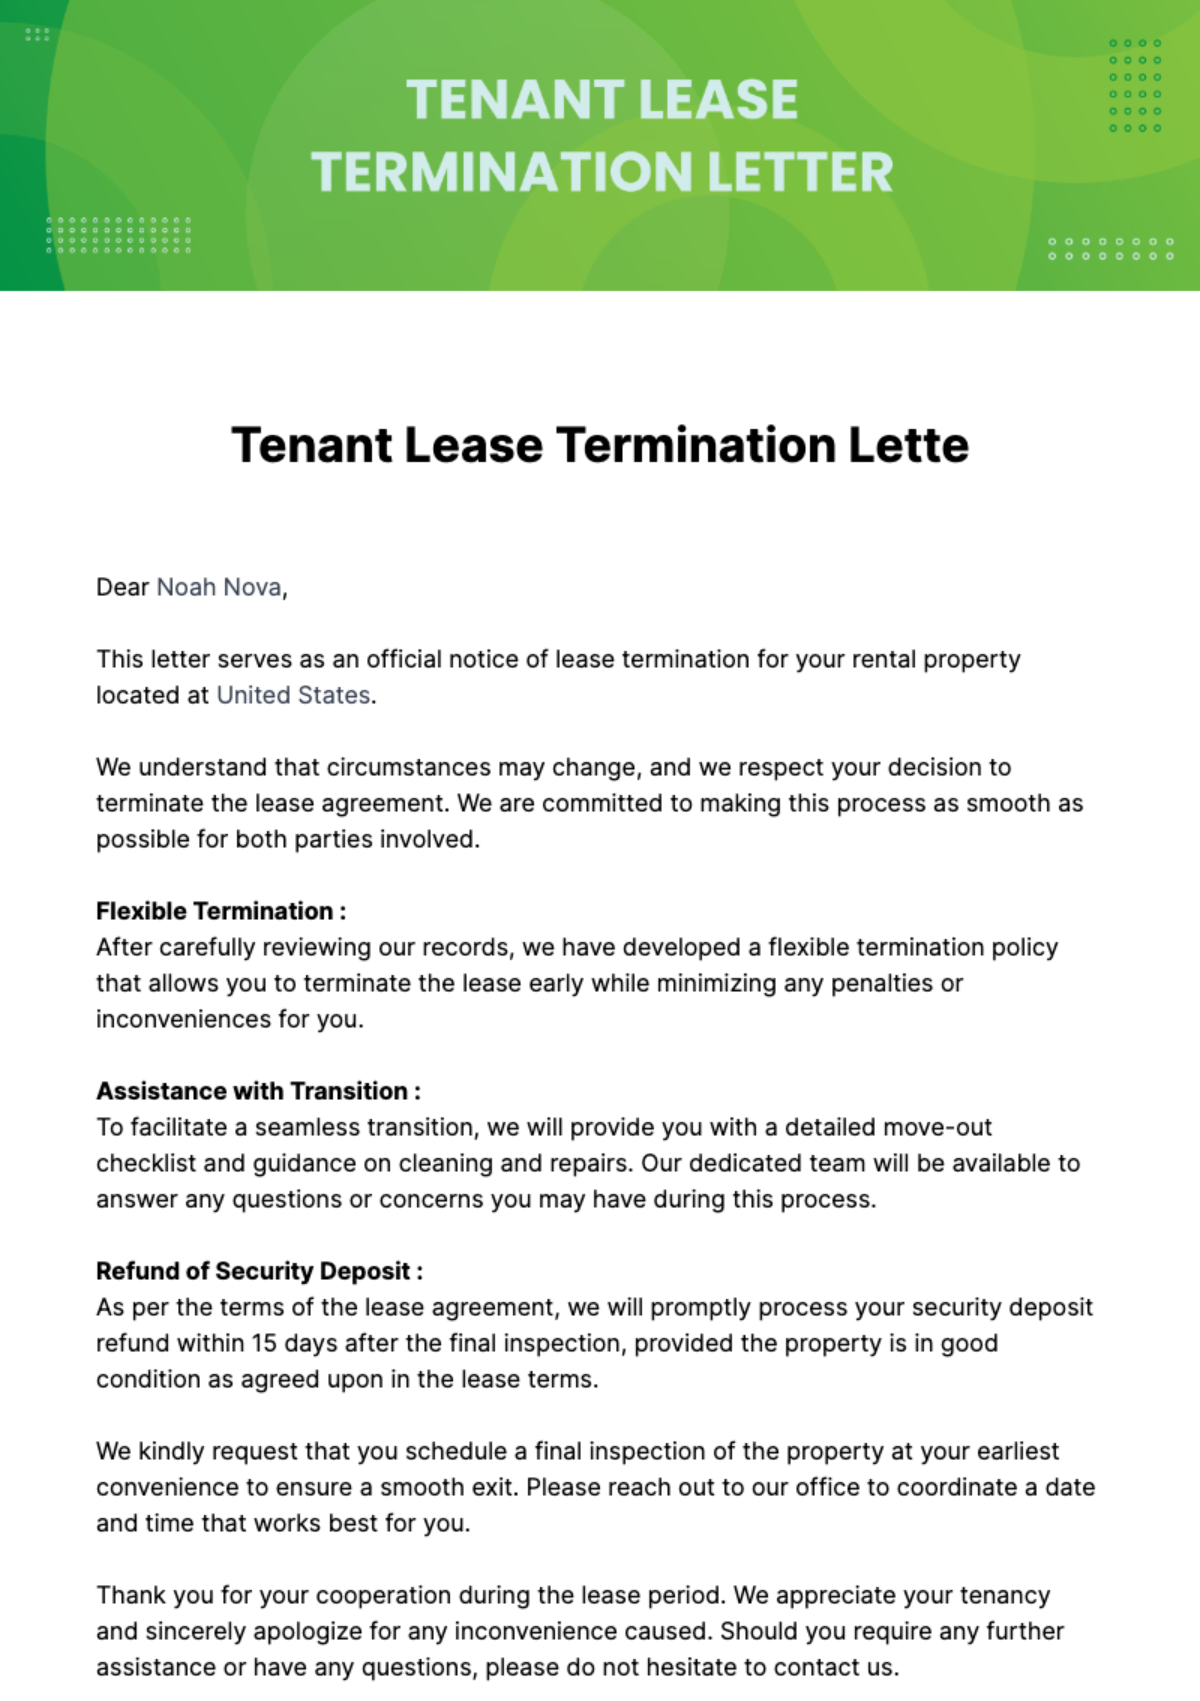 Free Tenant Lease Termination Letter Template